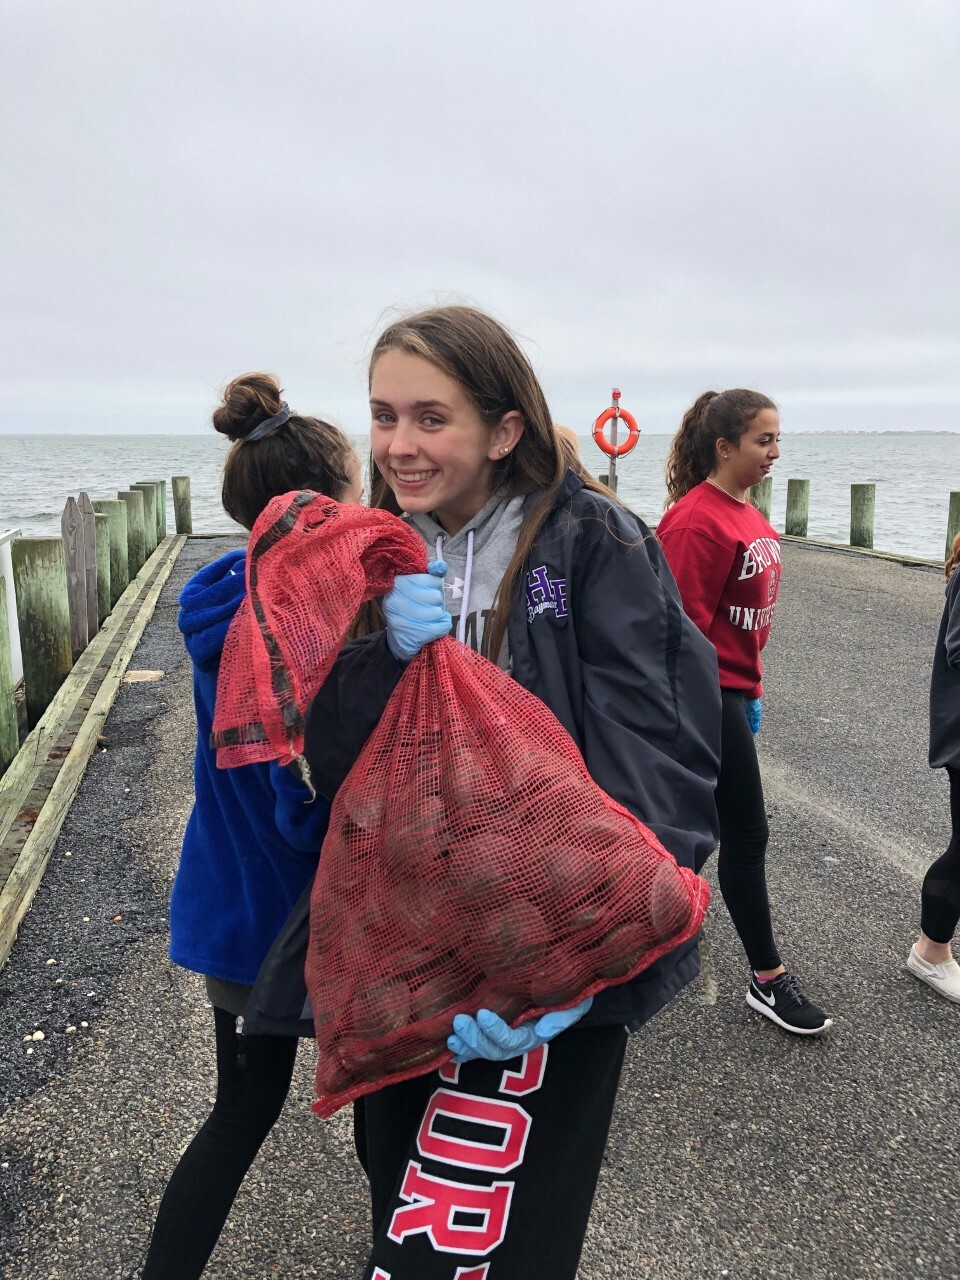 Hampton Bays High School science research students are helping to restore the water quality of local bays by seeding the waters with adult clams, as part of the Shinnecock Bay Restoration Program, with help from Stony Brook University.